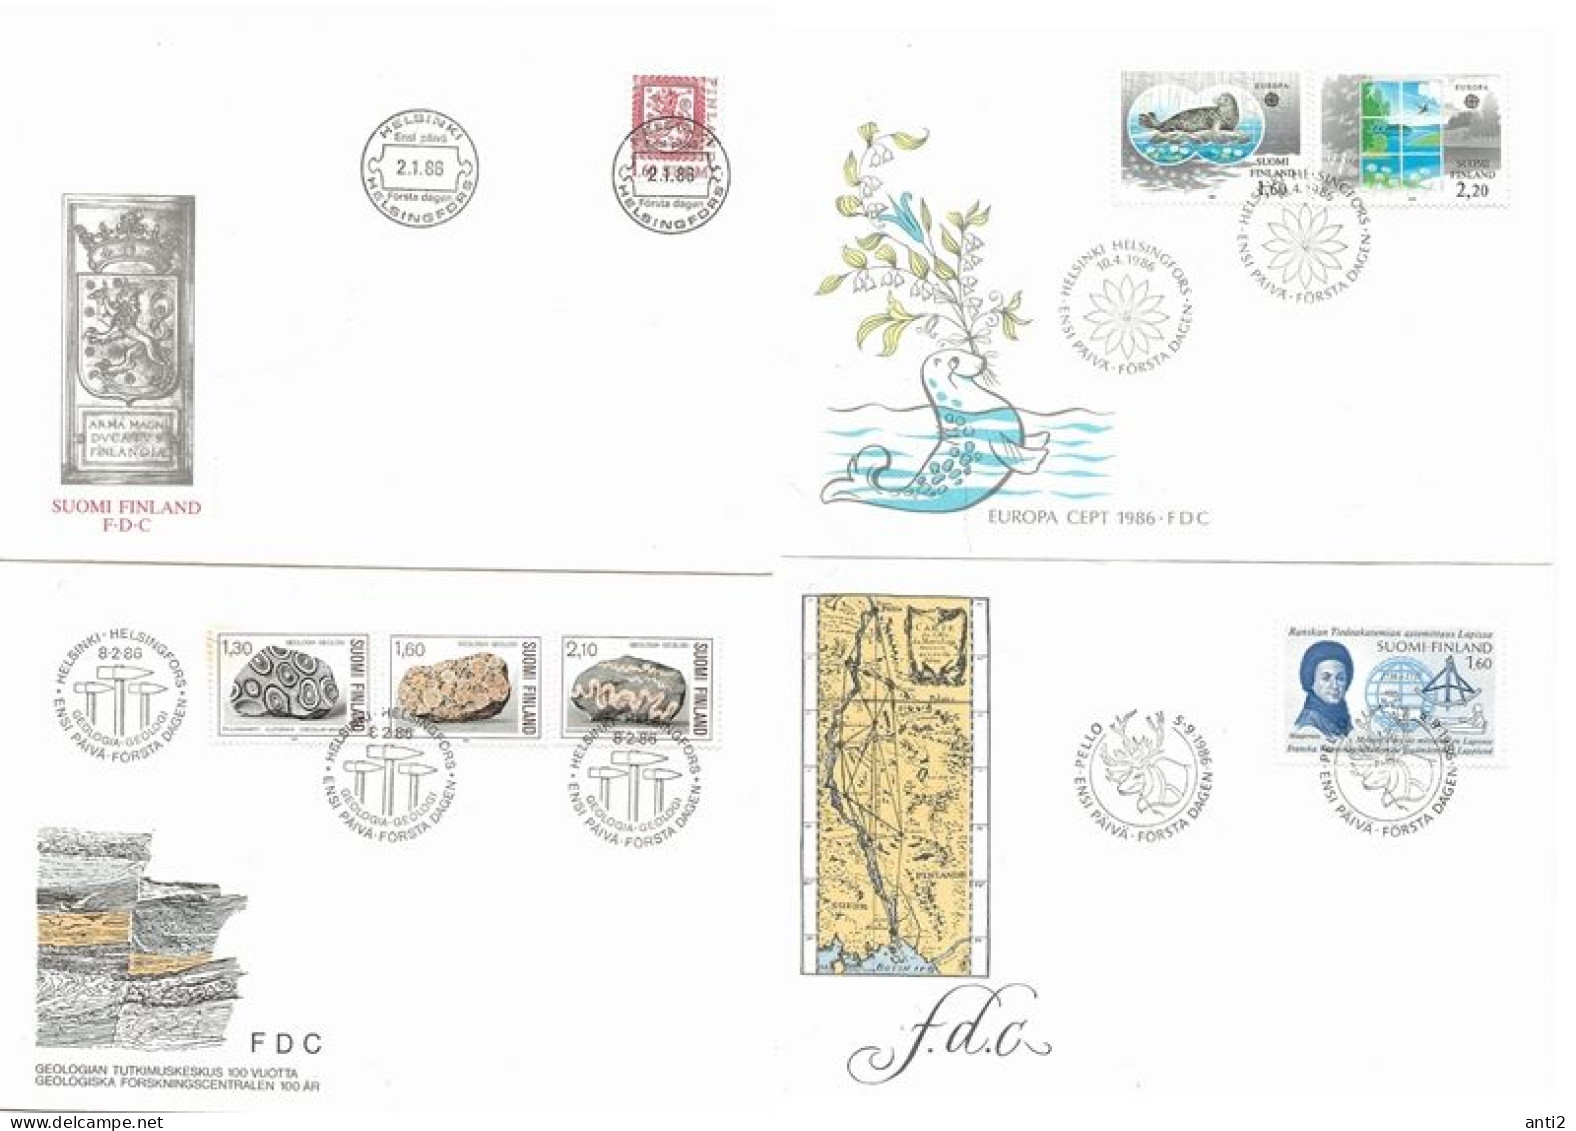 Finland   1986 8 FDC Issued 1986  - Stamps, Booklet, Bloc  -  981-992, Bloc 2, 1002-1004   FDCs - Covers & Documents